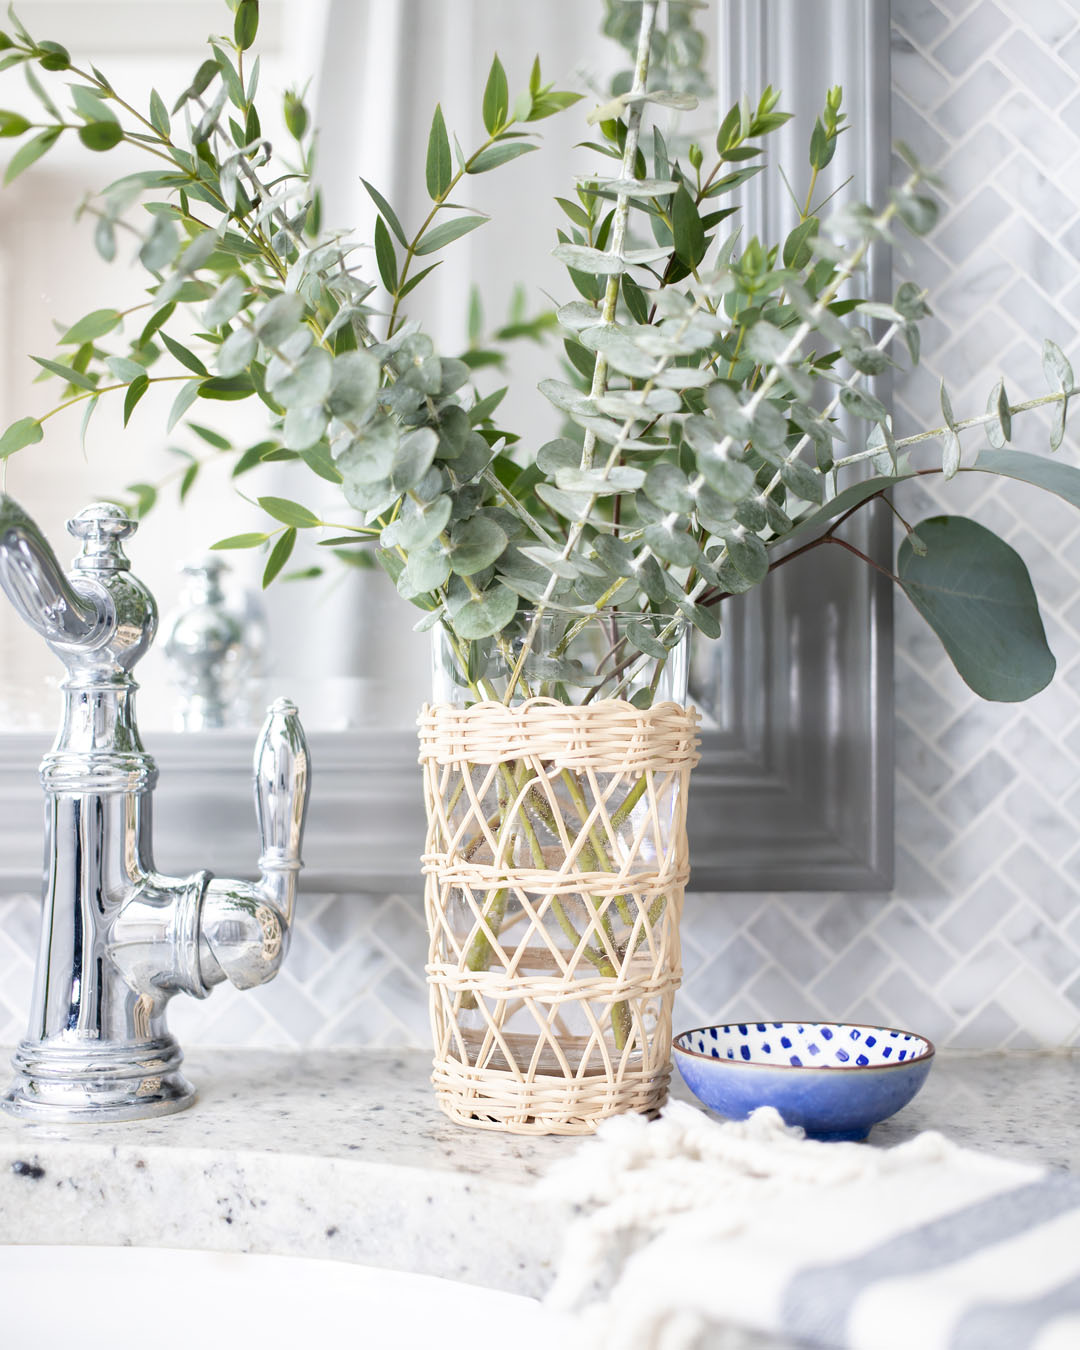 In today's post we'll talk about how to care for fresh eucalyptus so it lasts as long as possible and dries nicely too!